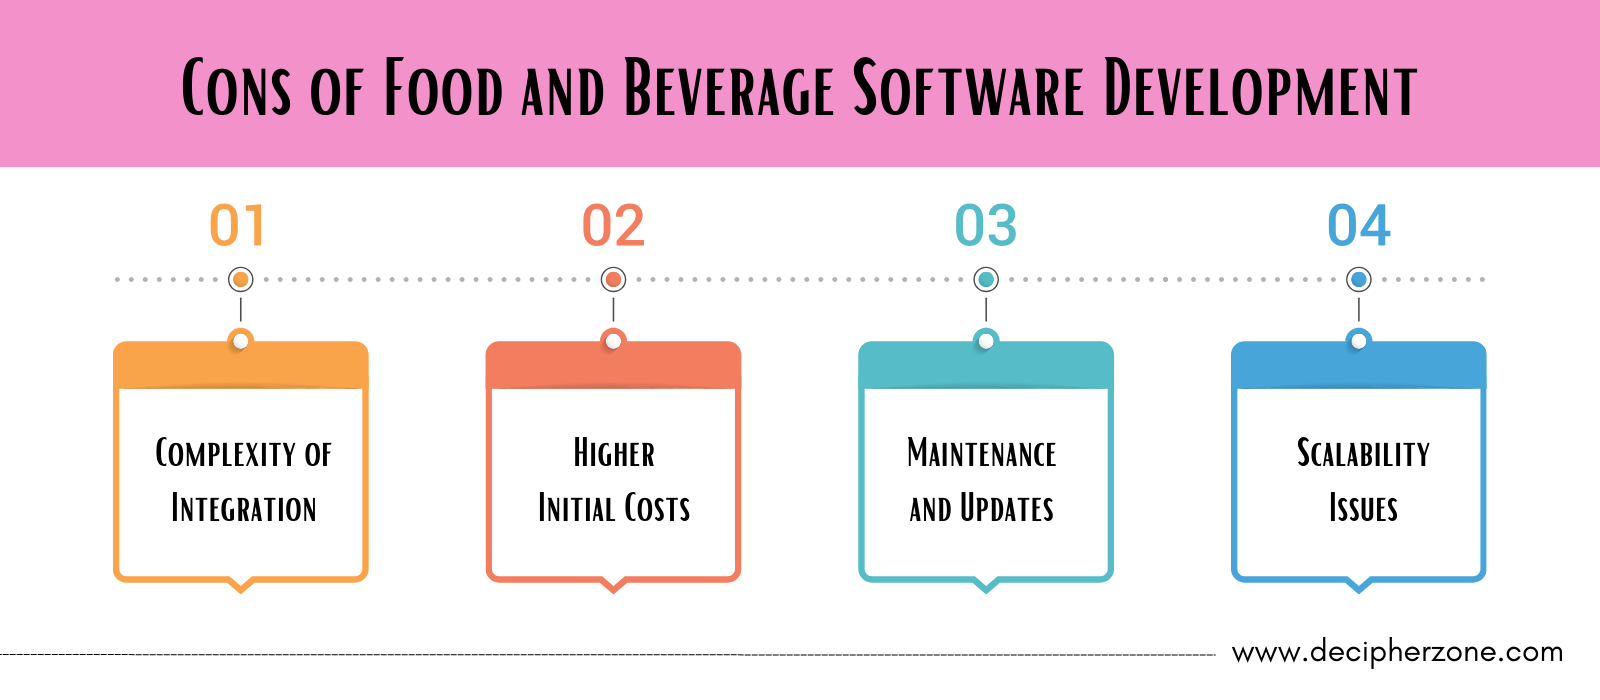 Cons of Food and Beverage Software Development